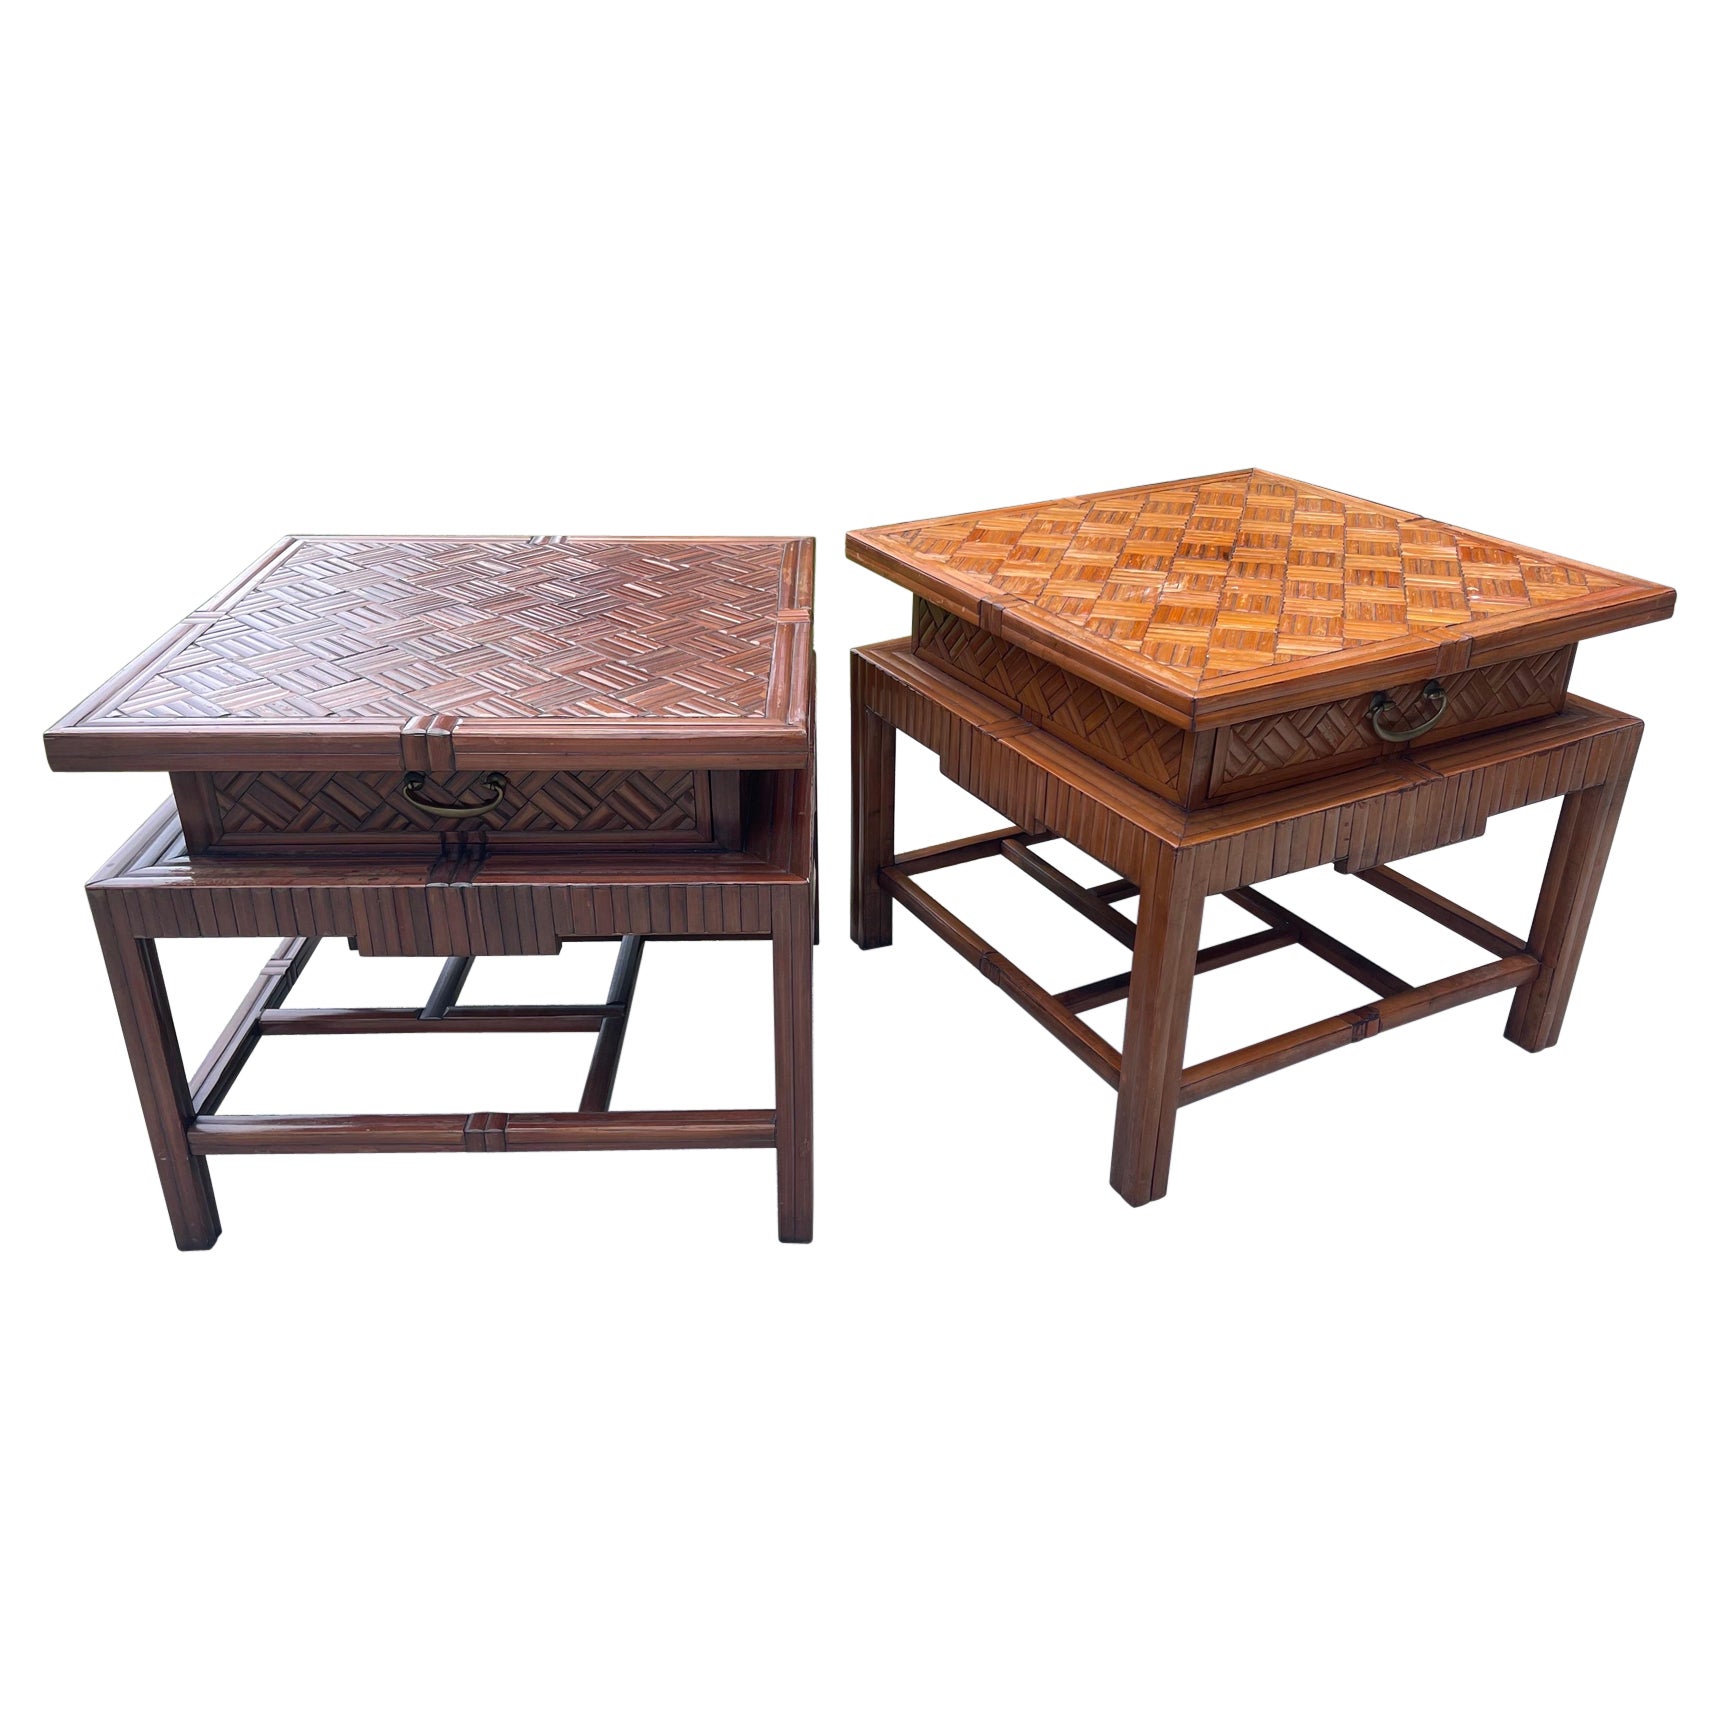 1940s Korean Bamboo Pagoda Side Tables or Nightstands with Drawers, a Pair For Sale